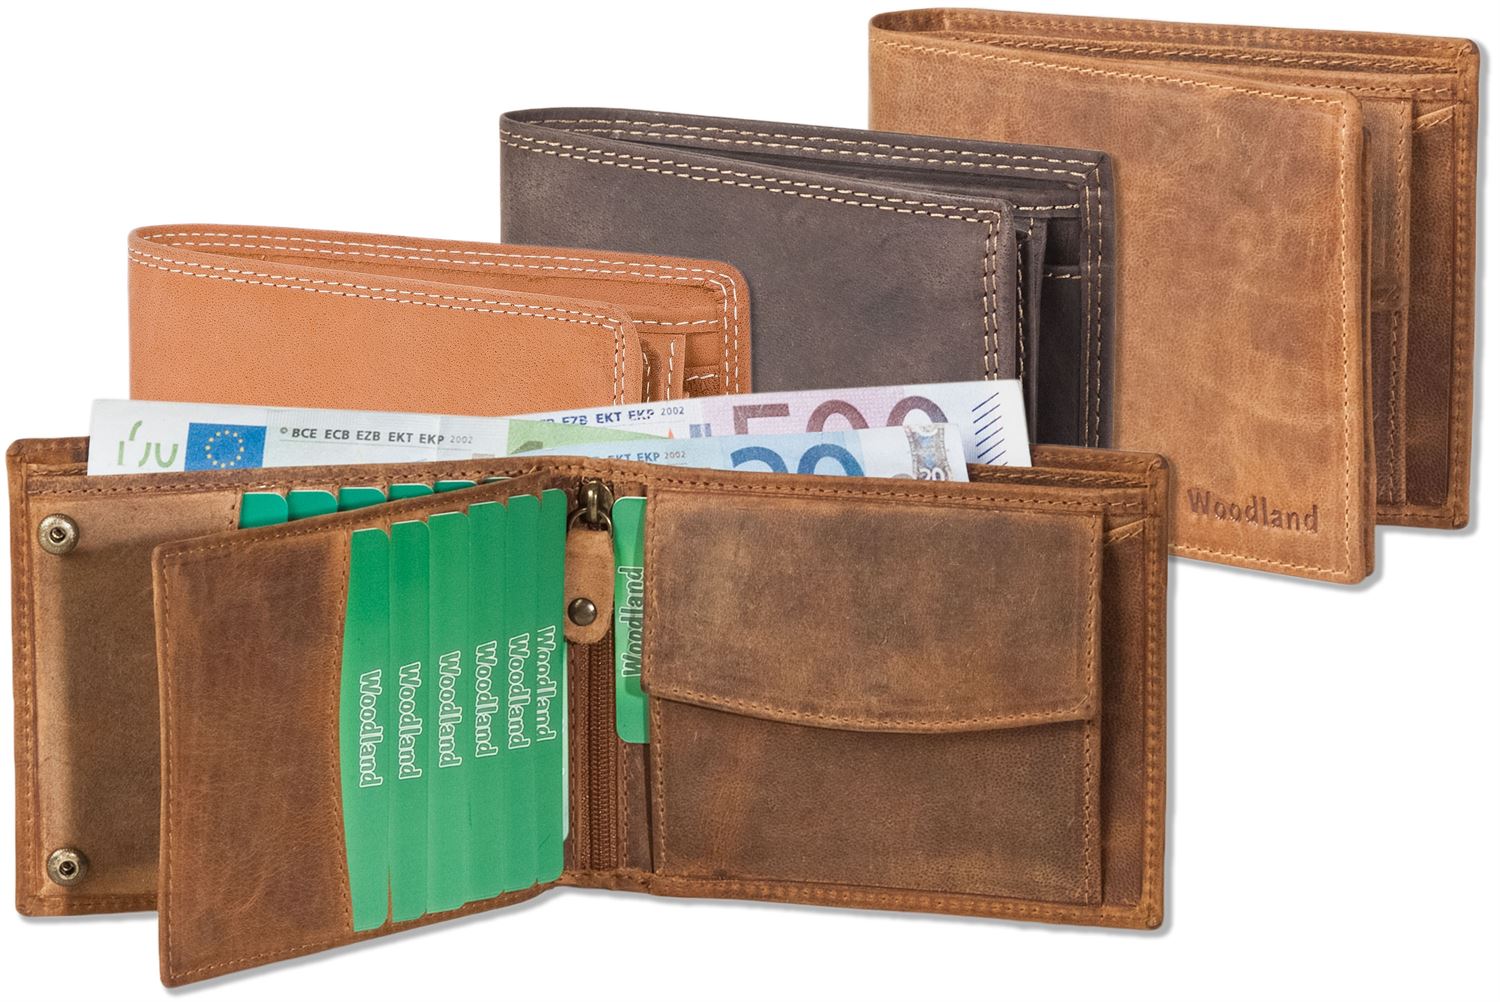 Buy Woodland Woodland Men Leather Two Fold Wallet at Redfynd